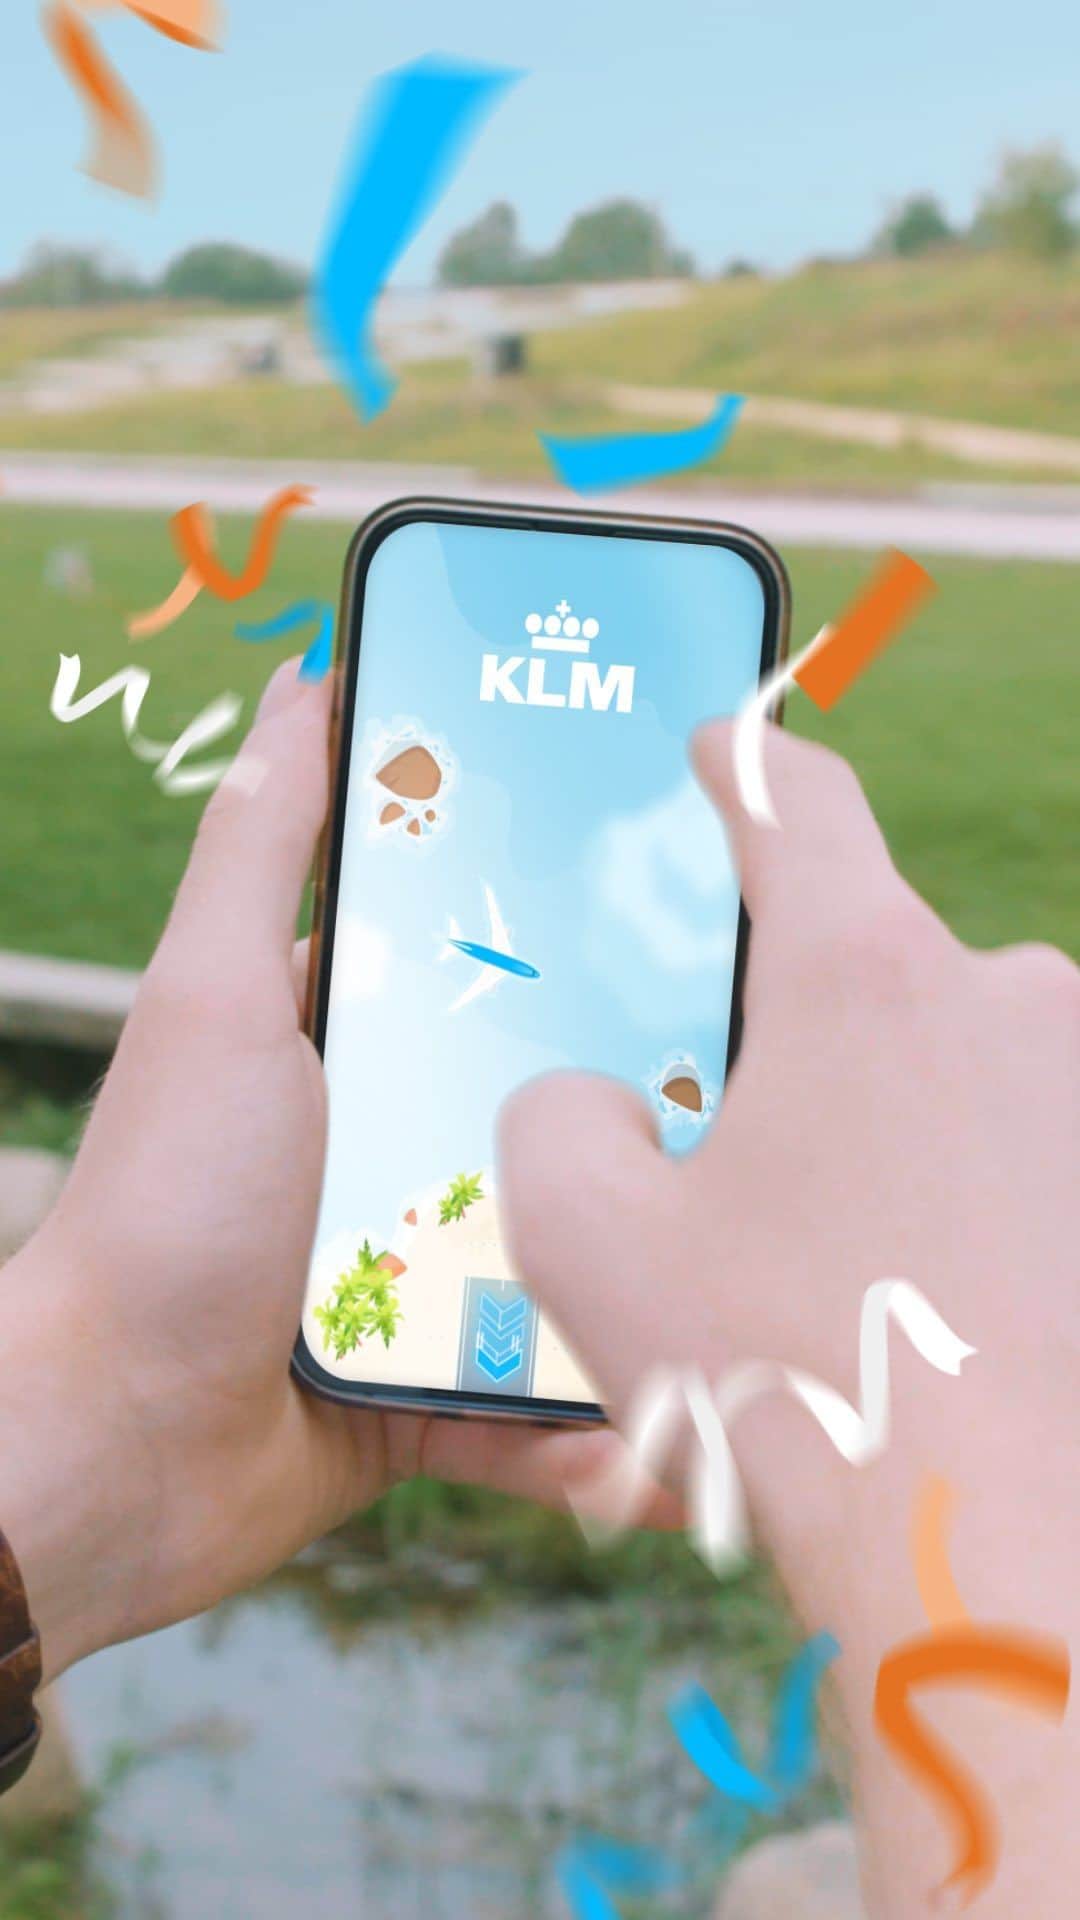 KLMオランダ航空のインスタグラム：「It’s written in the clouds ☁️ 1️⃣0️⃣4️⃣ years of KLM! 🎉 In honor of our birthday, we’ve created our own Air Fiesta game so we can share the birthday joy with you. Do you have what it takes to be a great captain? 👨‍✈️ Check our link in bio and find out!   #KLM #RoyalDutchAirlines #7October #104 #birthday #celebrations #clouds #sky」